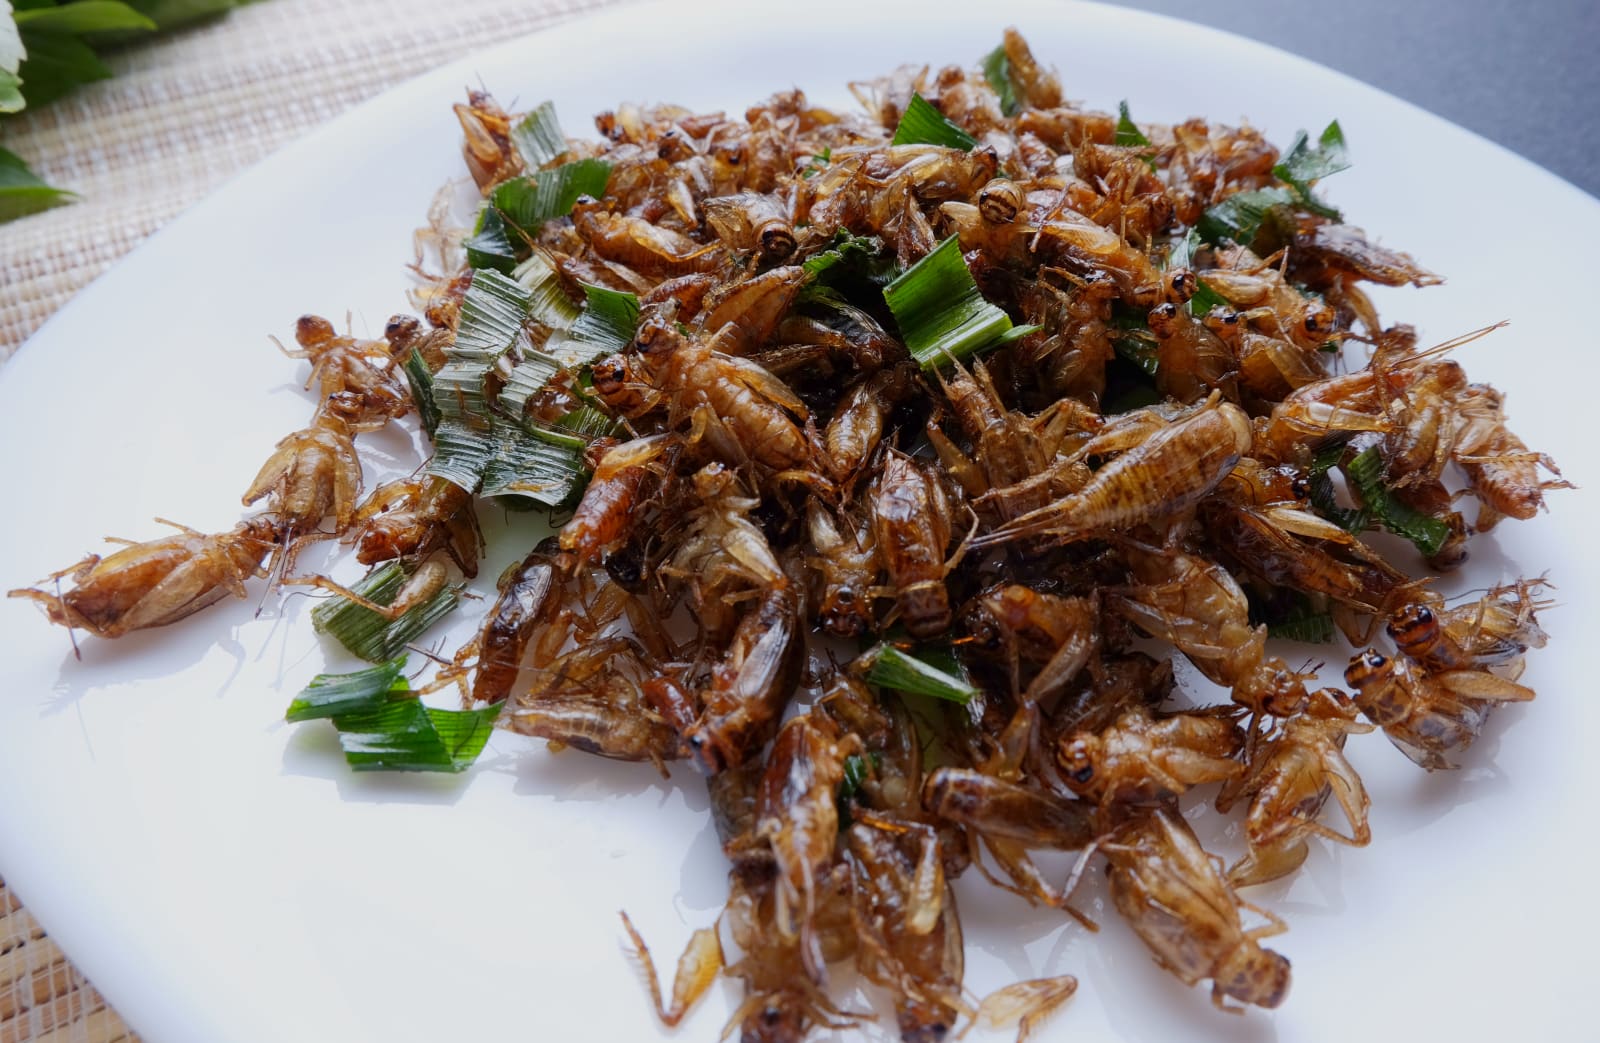 Horse cricket fried with sliced lemon grass